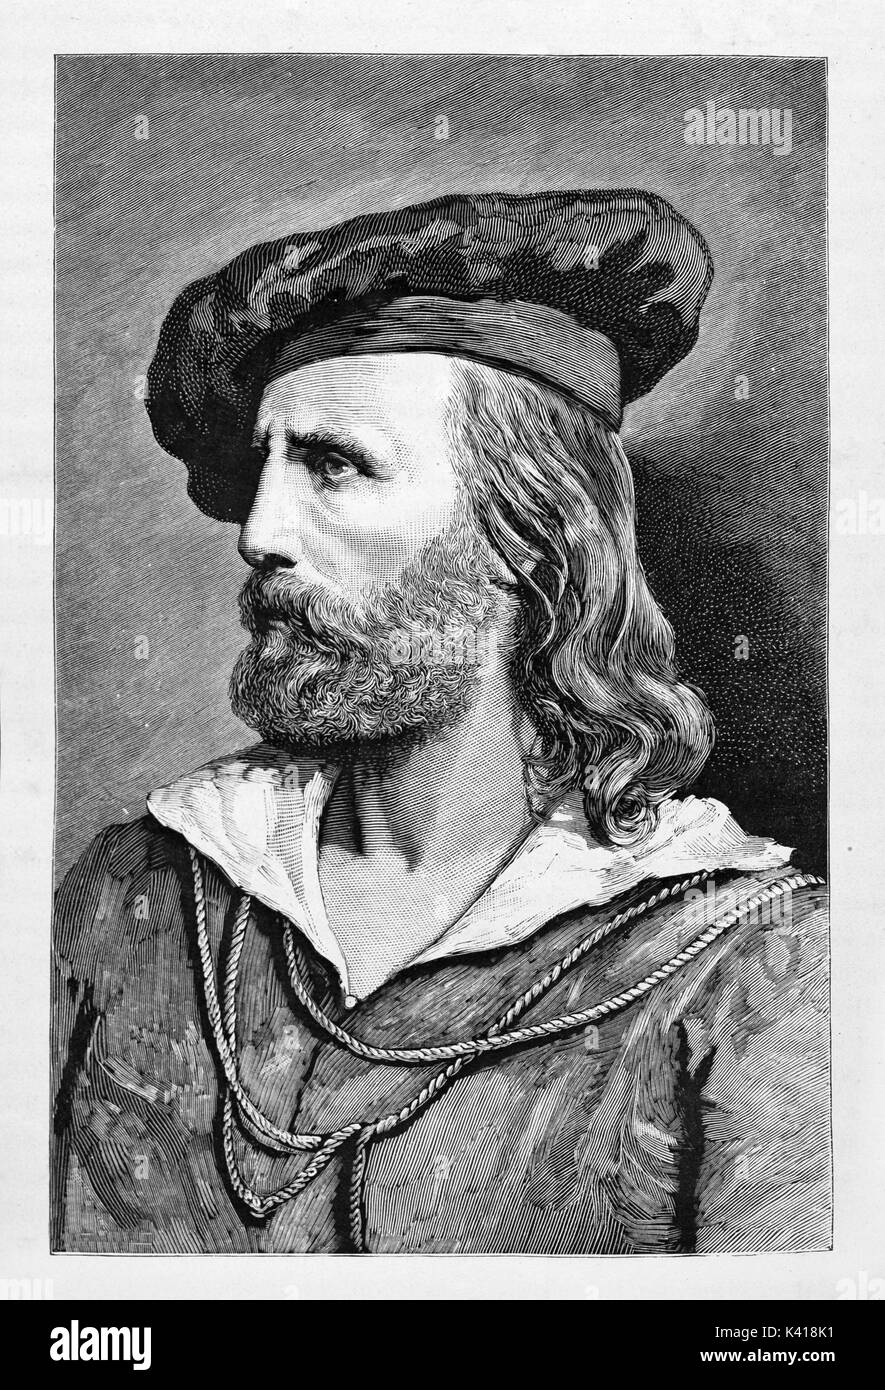 Ancient bust profile portrait of young Giuseppe Garibaldi dressed in ancient clothes with a hat. Typical long beard and hairs. By E. Matania published on Garibaldi e i Suoi Tempi Milan Italy 1884 Stock Photo